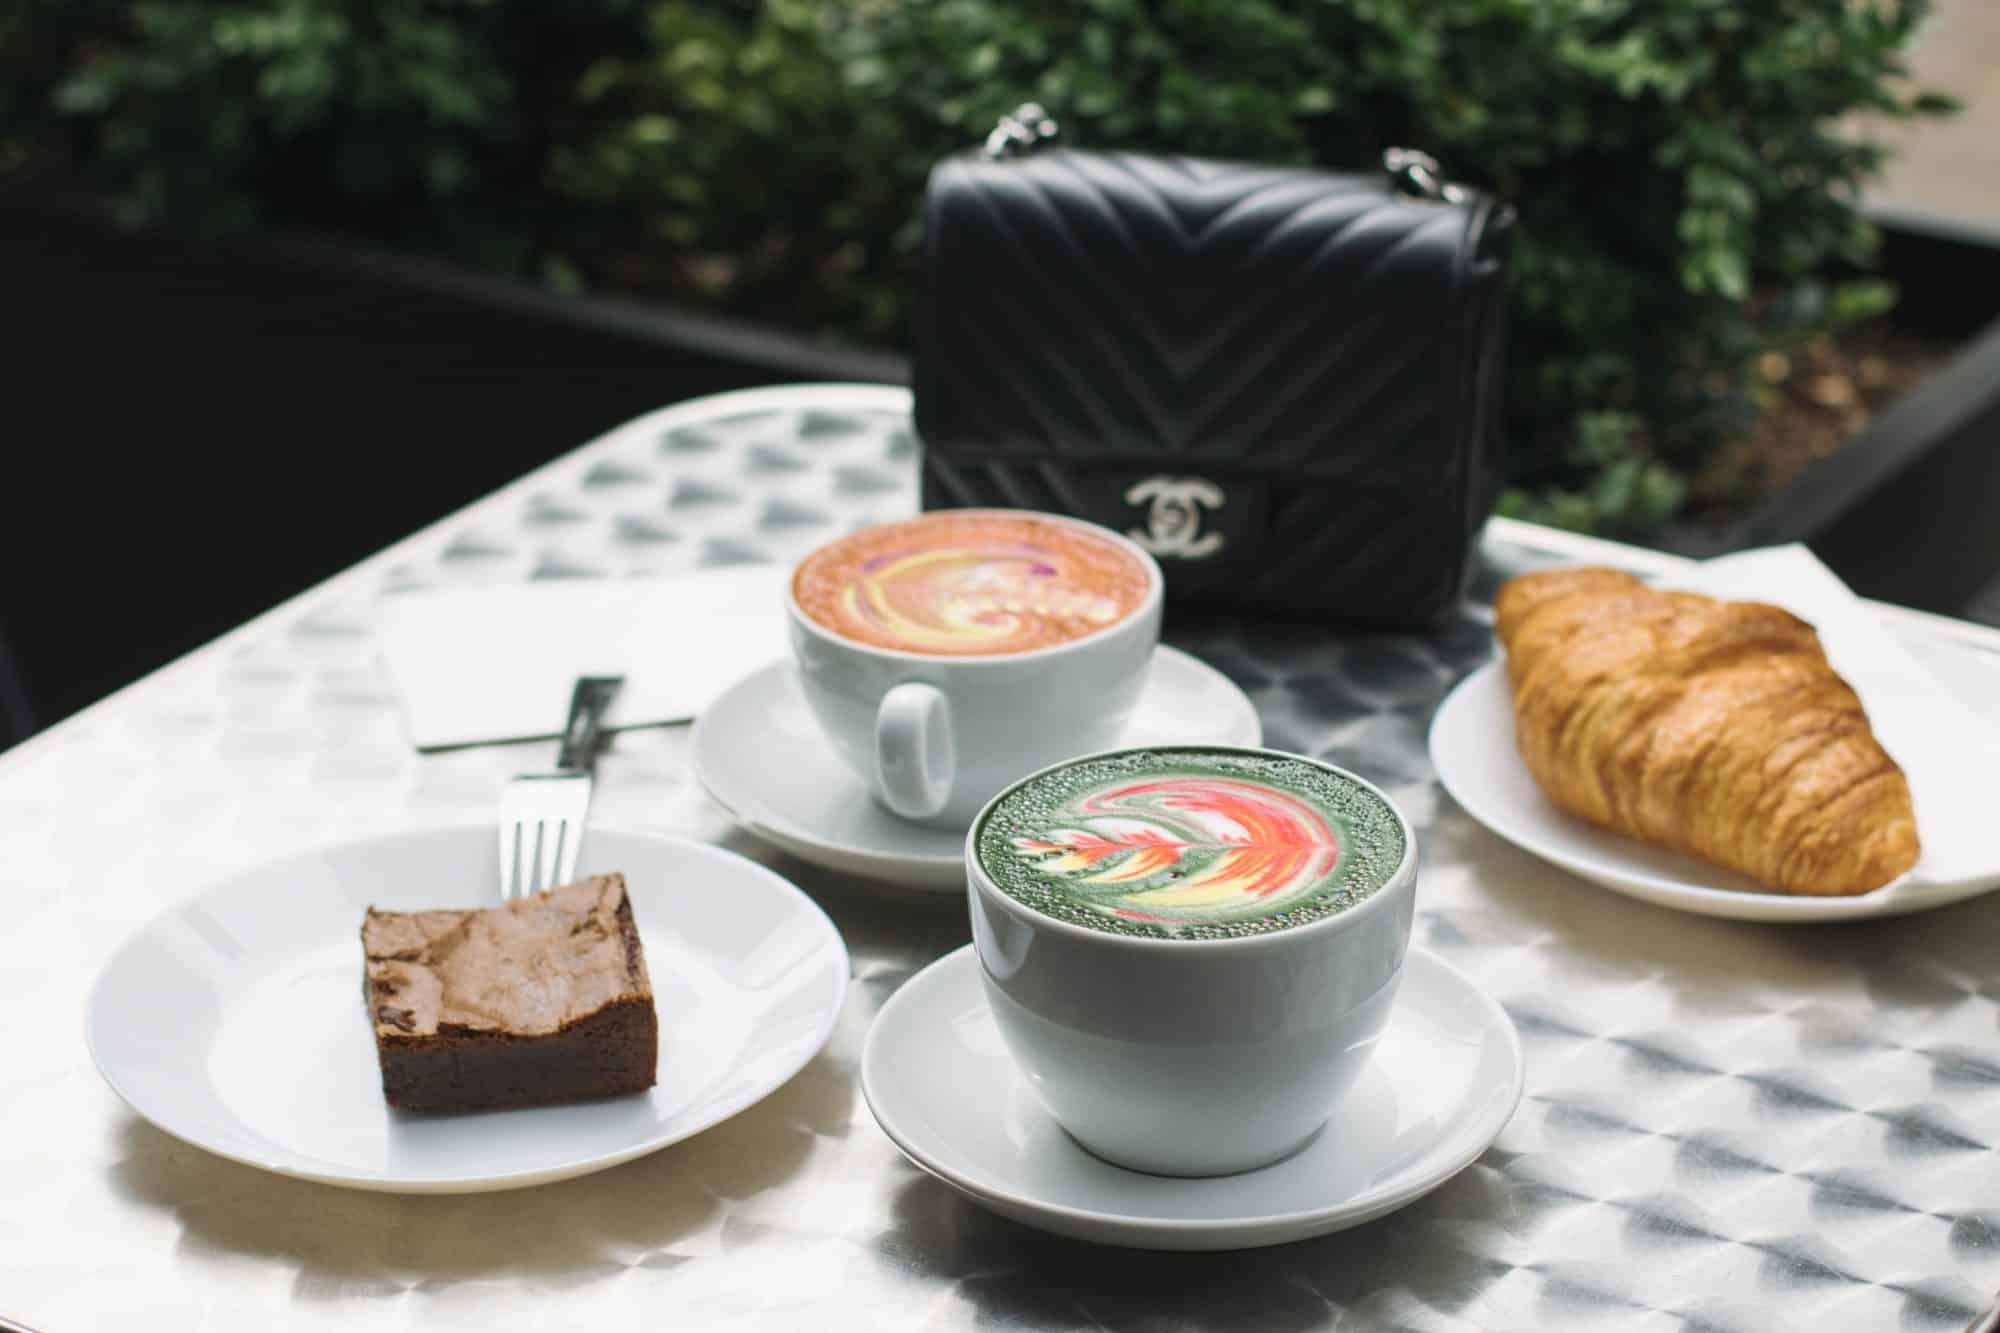 The best Toronto coffee shops to visit | the most Instagram-worthy Toronto cafés | top Instagrammable cafes in Toronto, Ontario, Canada | cute coffee shops in Toronto | where to take Instagram photos in YYZ | Diary of a Toronto Girl, a Canadian lifestyle blog